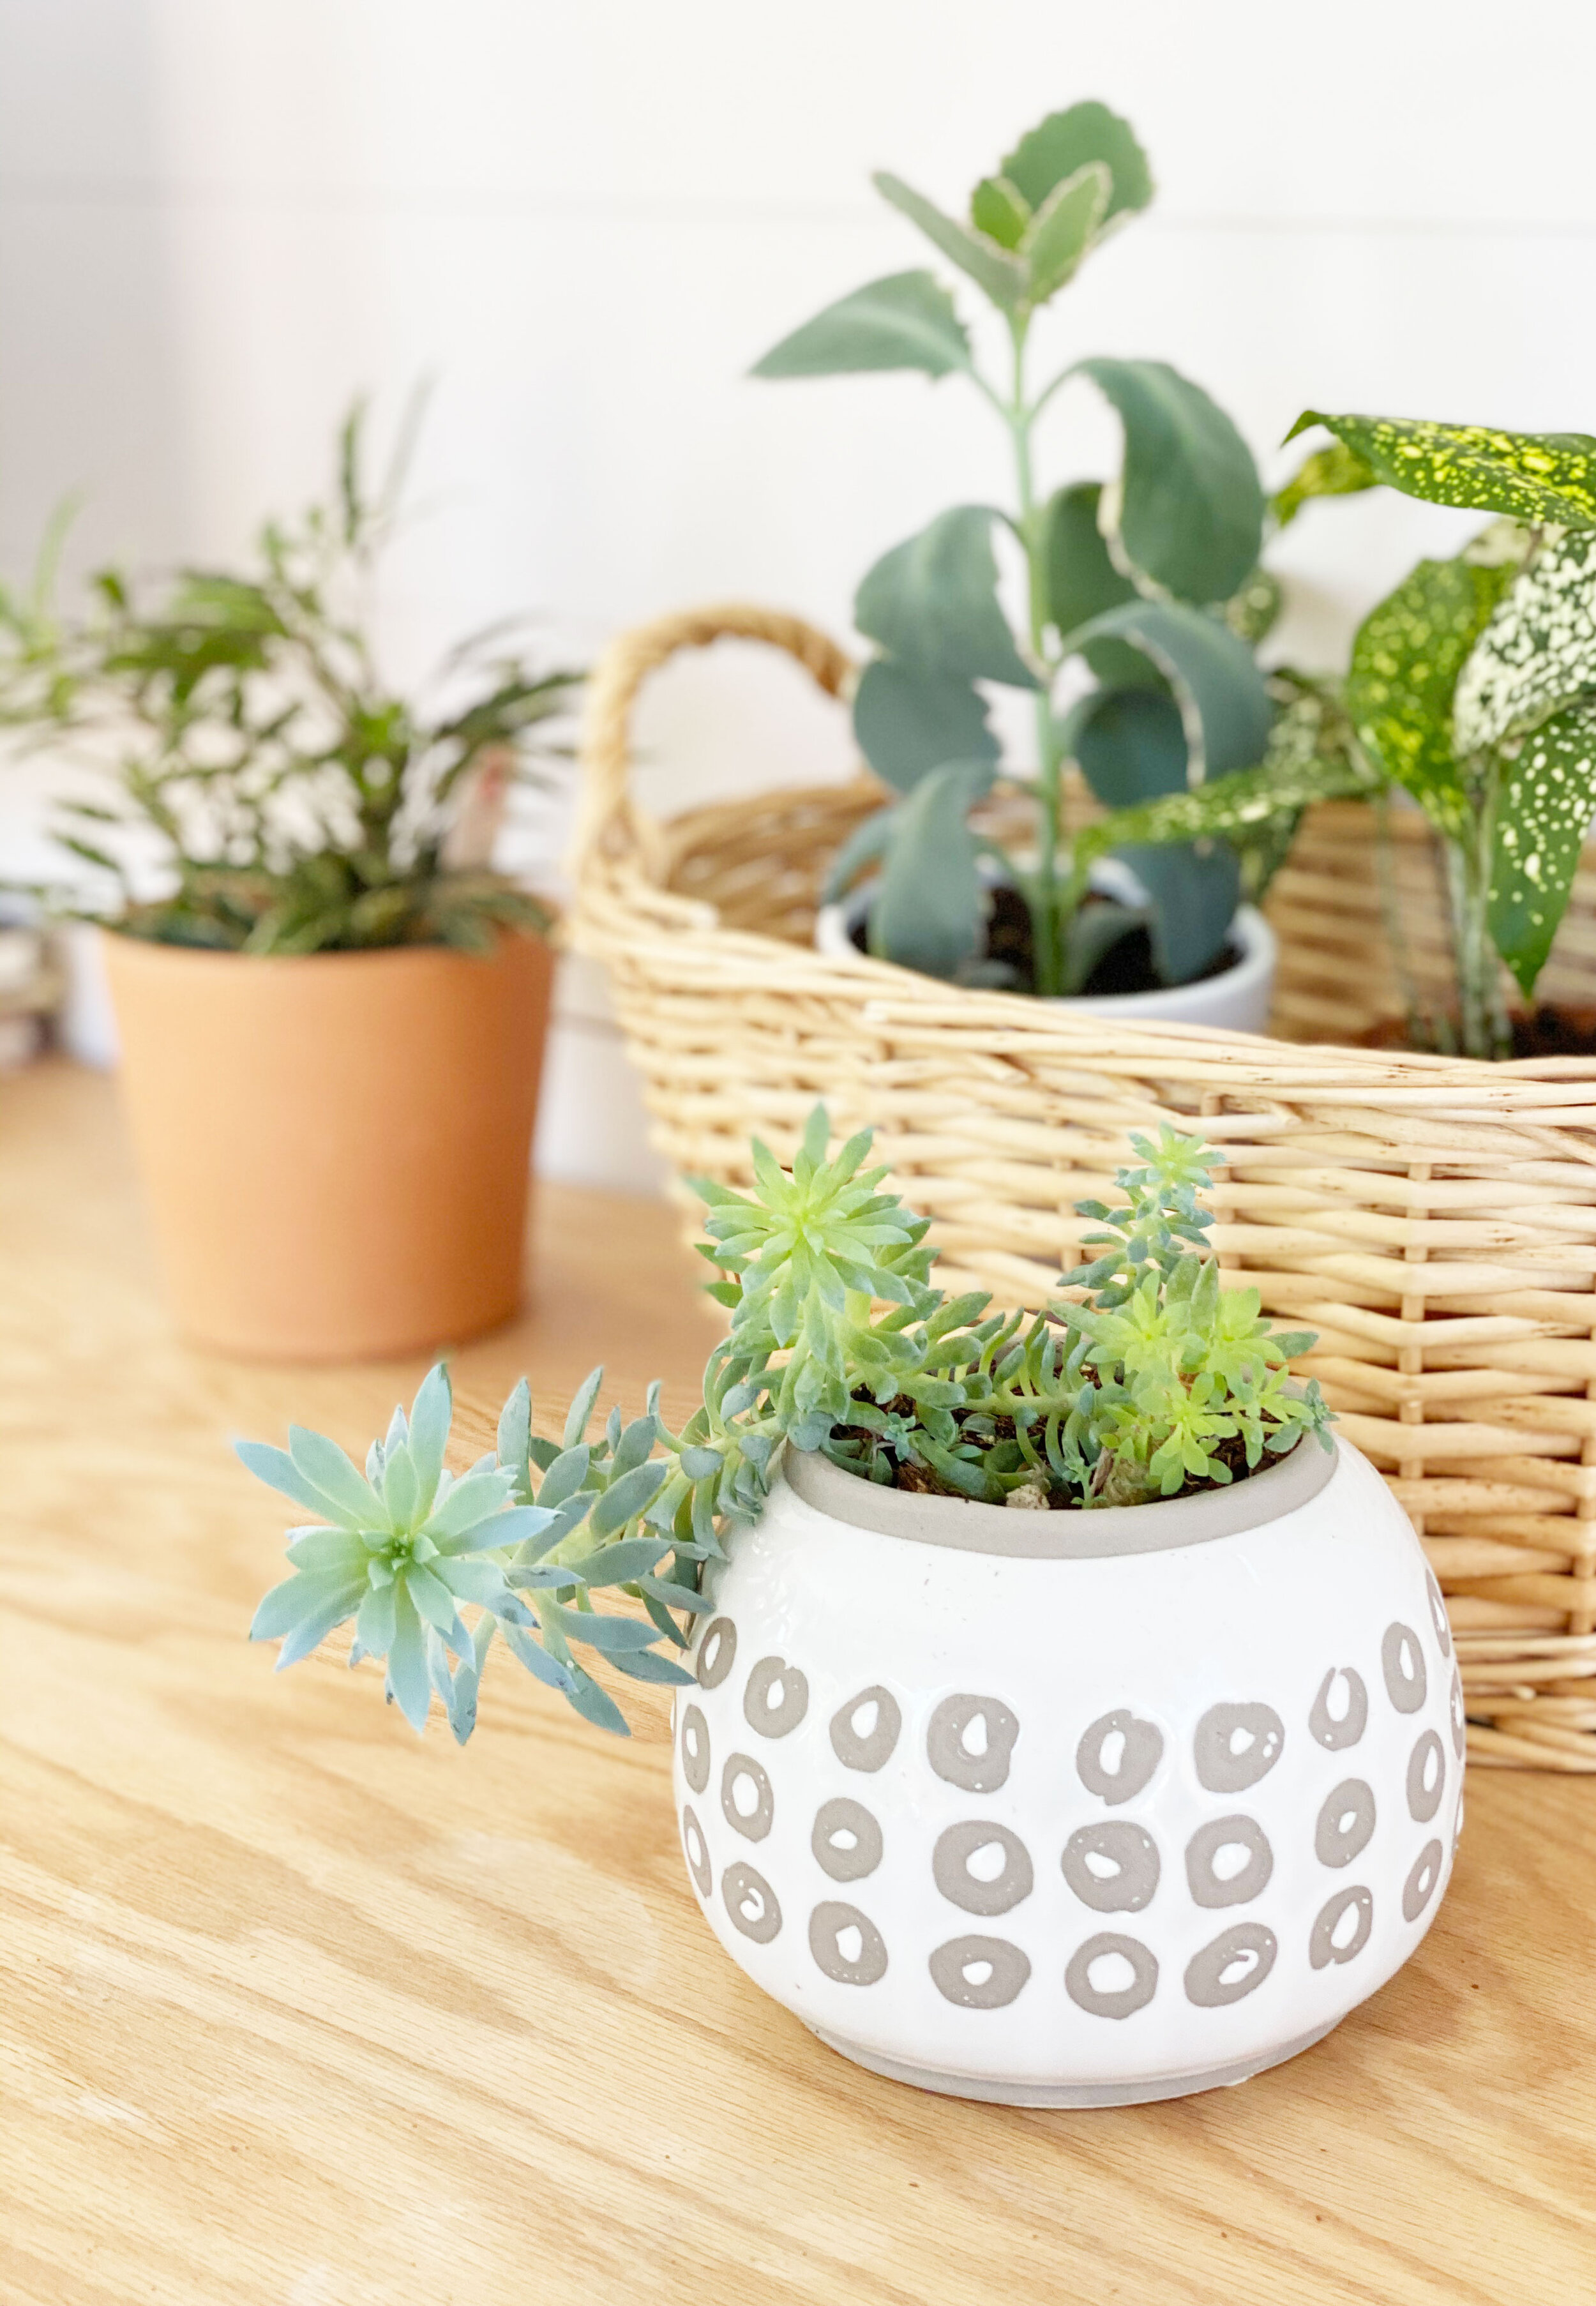  Some of my favorite plants. Did I mention I LOVE plants? This studio is so sunny (12 windows!) that there’s a perfect spot for all kinds of species. This little planter with the crazy succulents is one that reminds me of my hair in the morning. Haaa